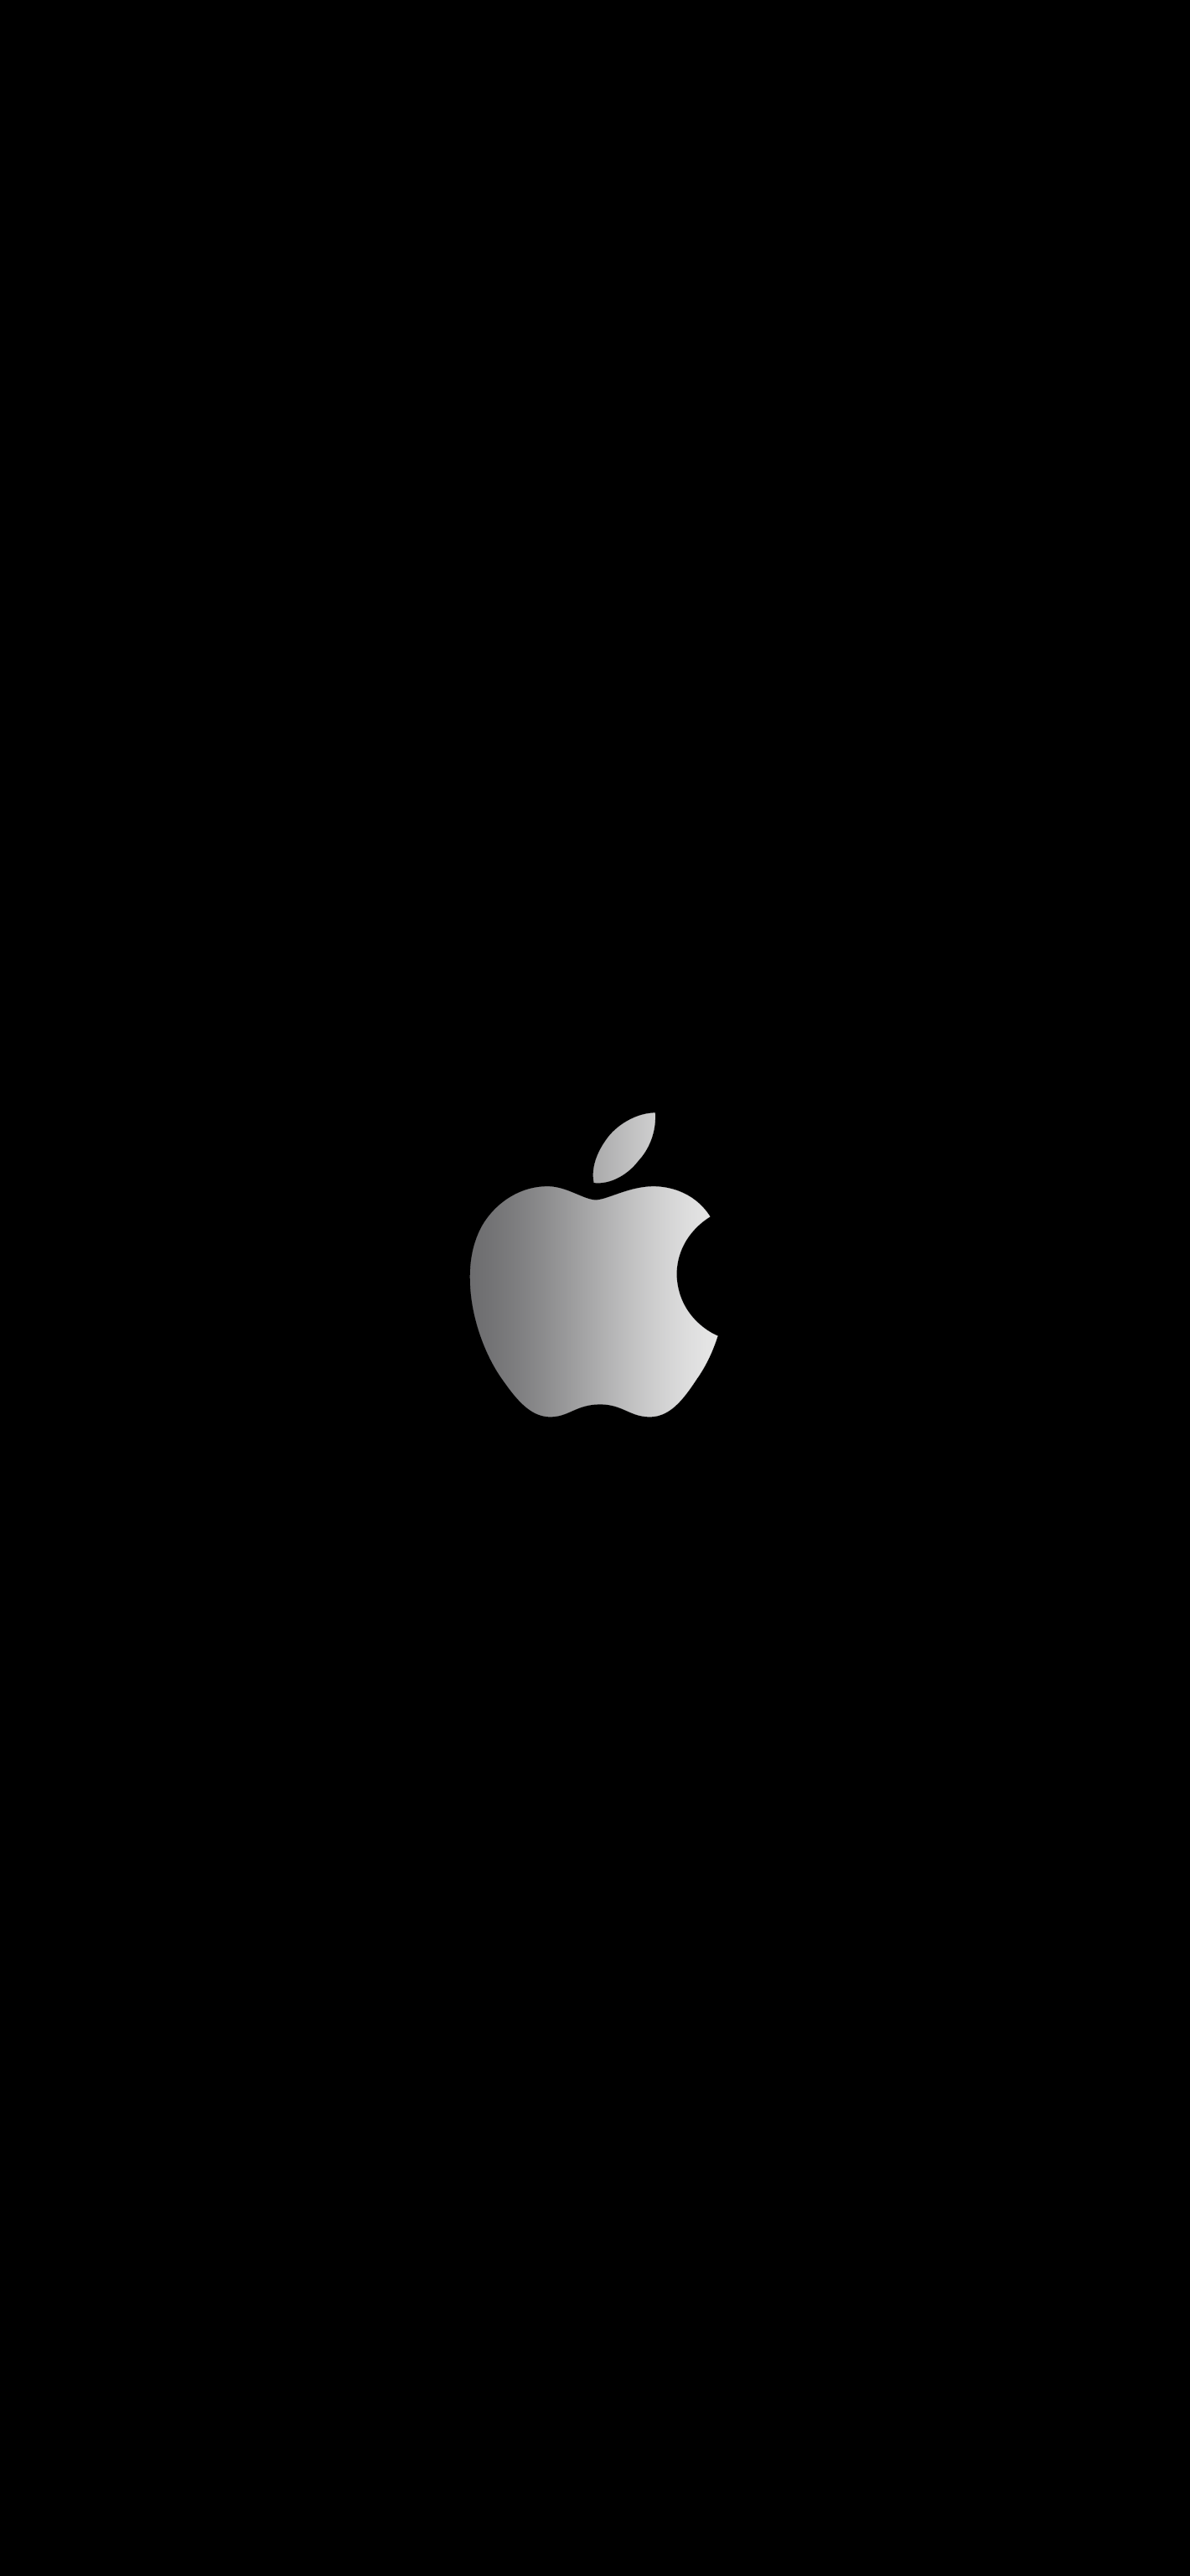 Apple Logo Animated iOS 11 | LIVE Wallpaper - Wallpapers Central